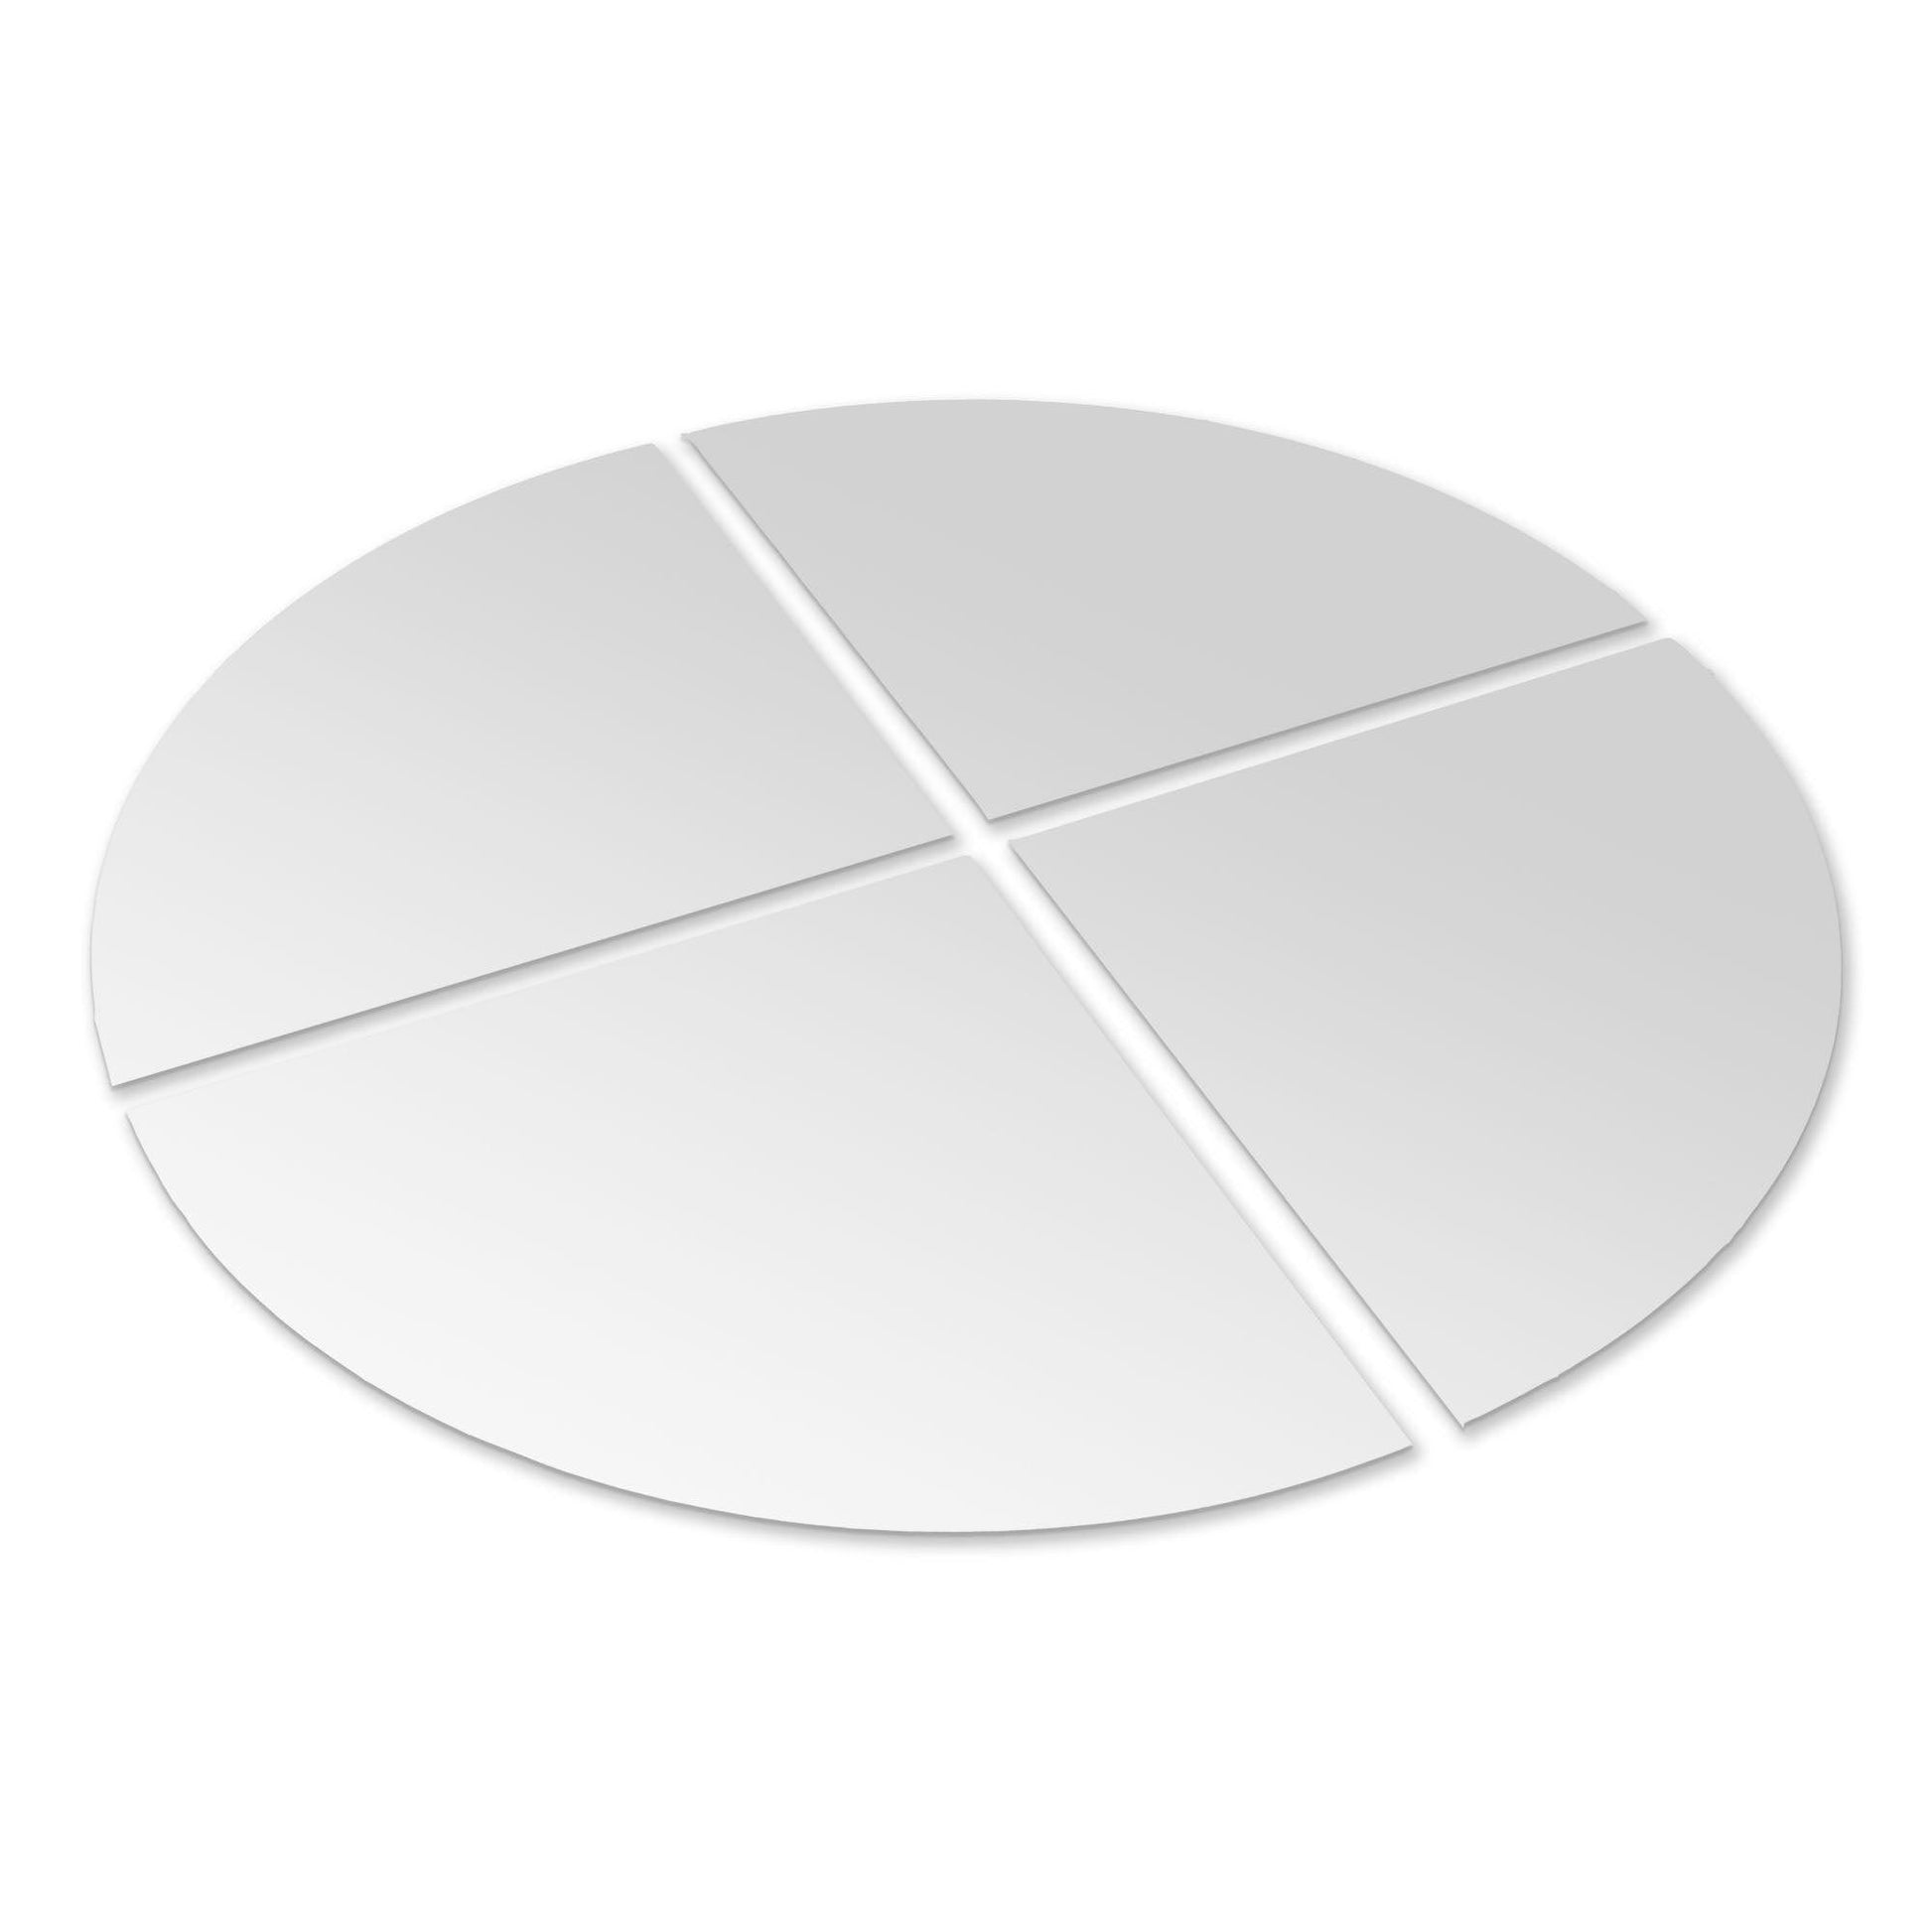 Americanflat Adhesive Mirror Tiles - Four Quarters Circular Design - Peel and Stick Mirrors for Wall. (4pcs Set)